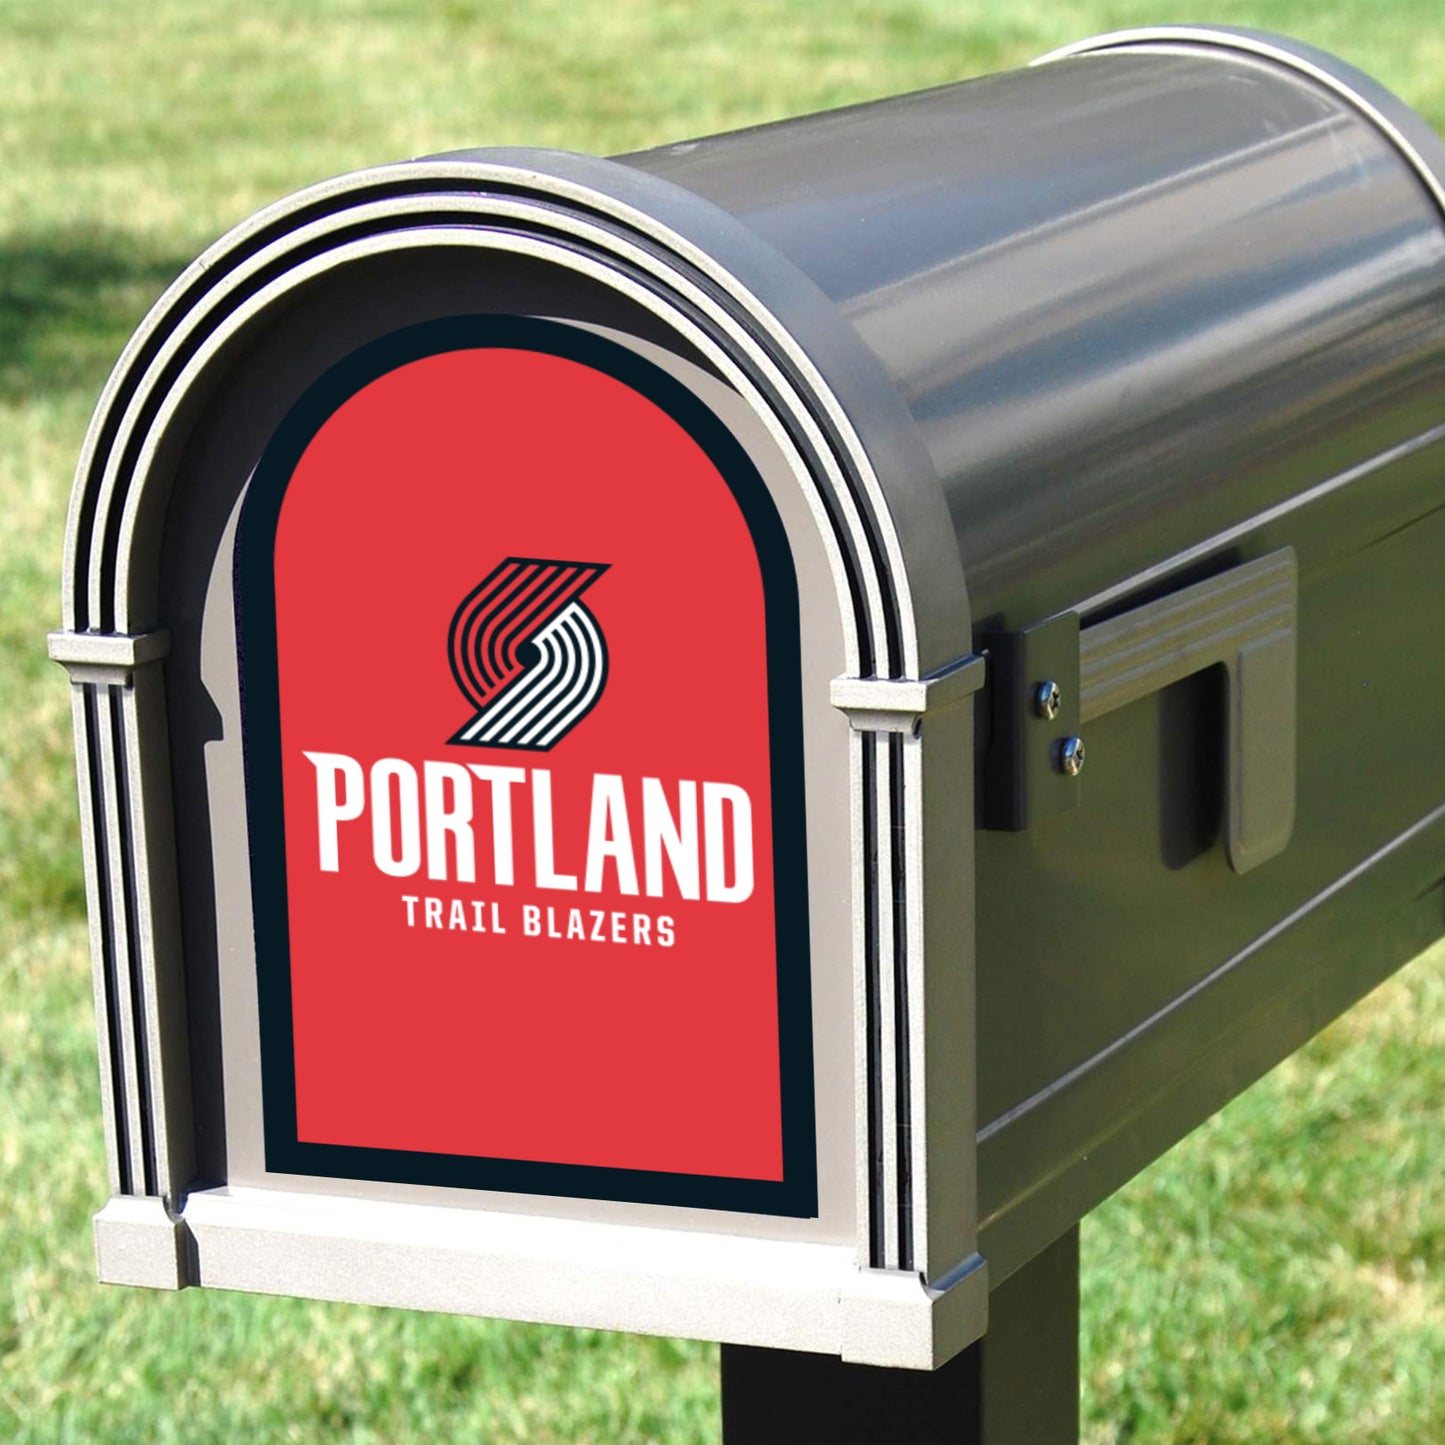 Portland Trail Blazers: Mailbox Logo - Officially Licensed NBA Outdoor Graphic